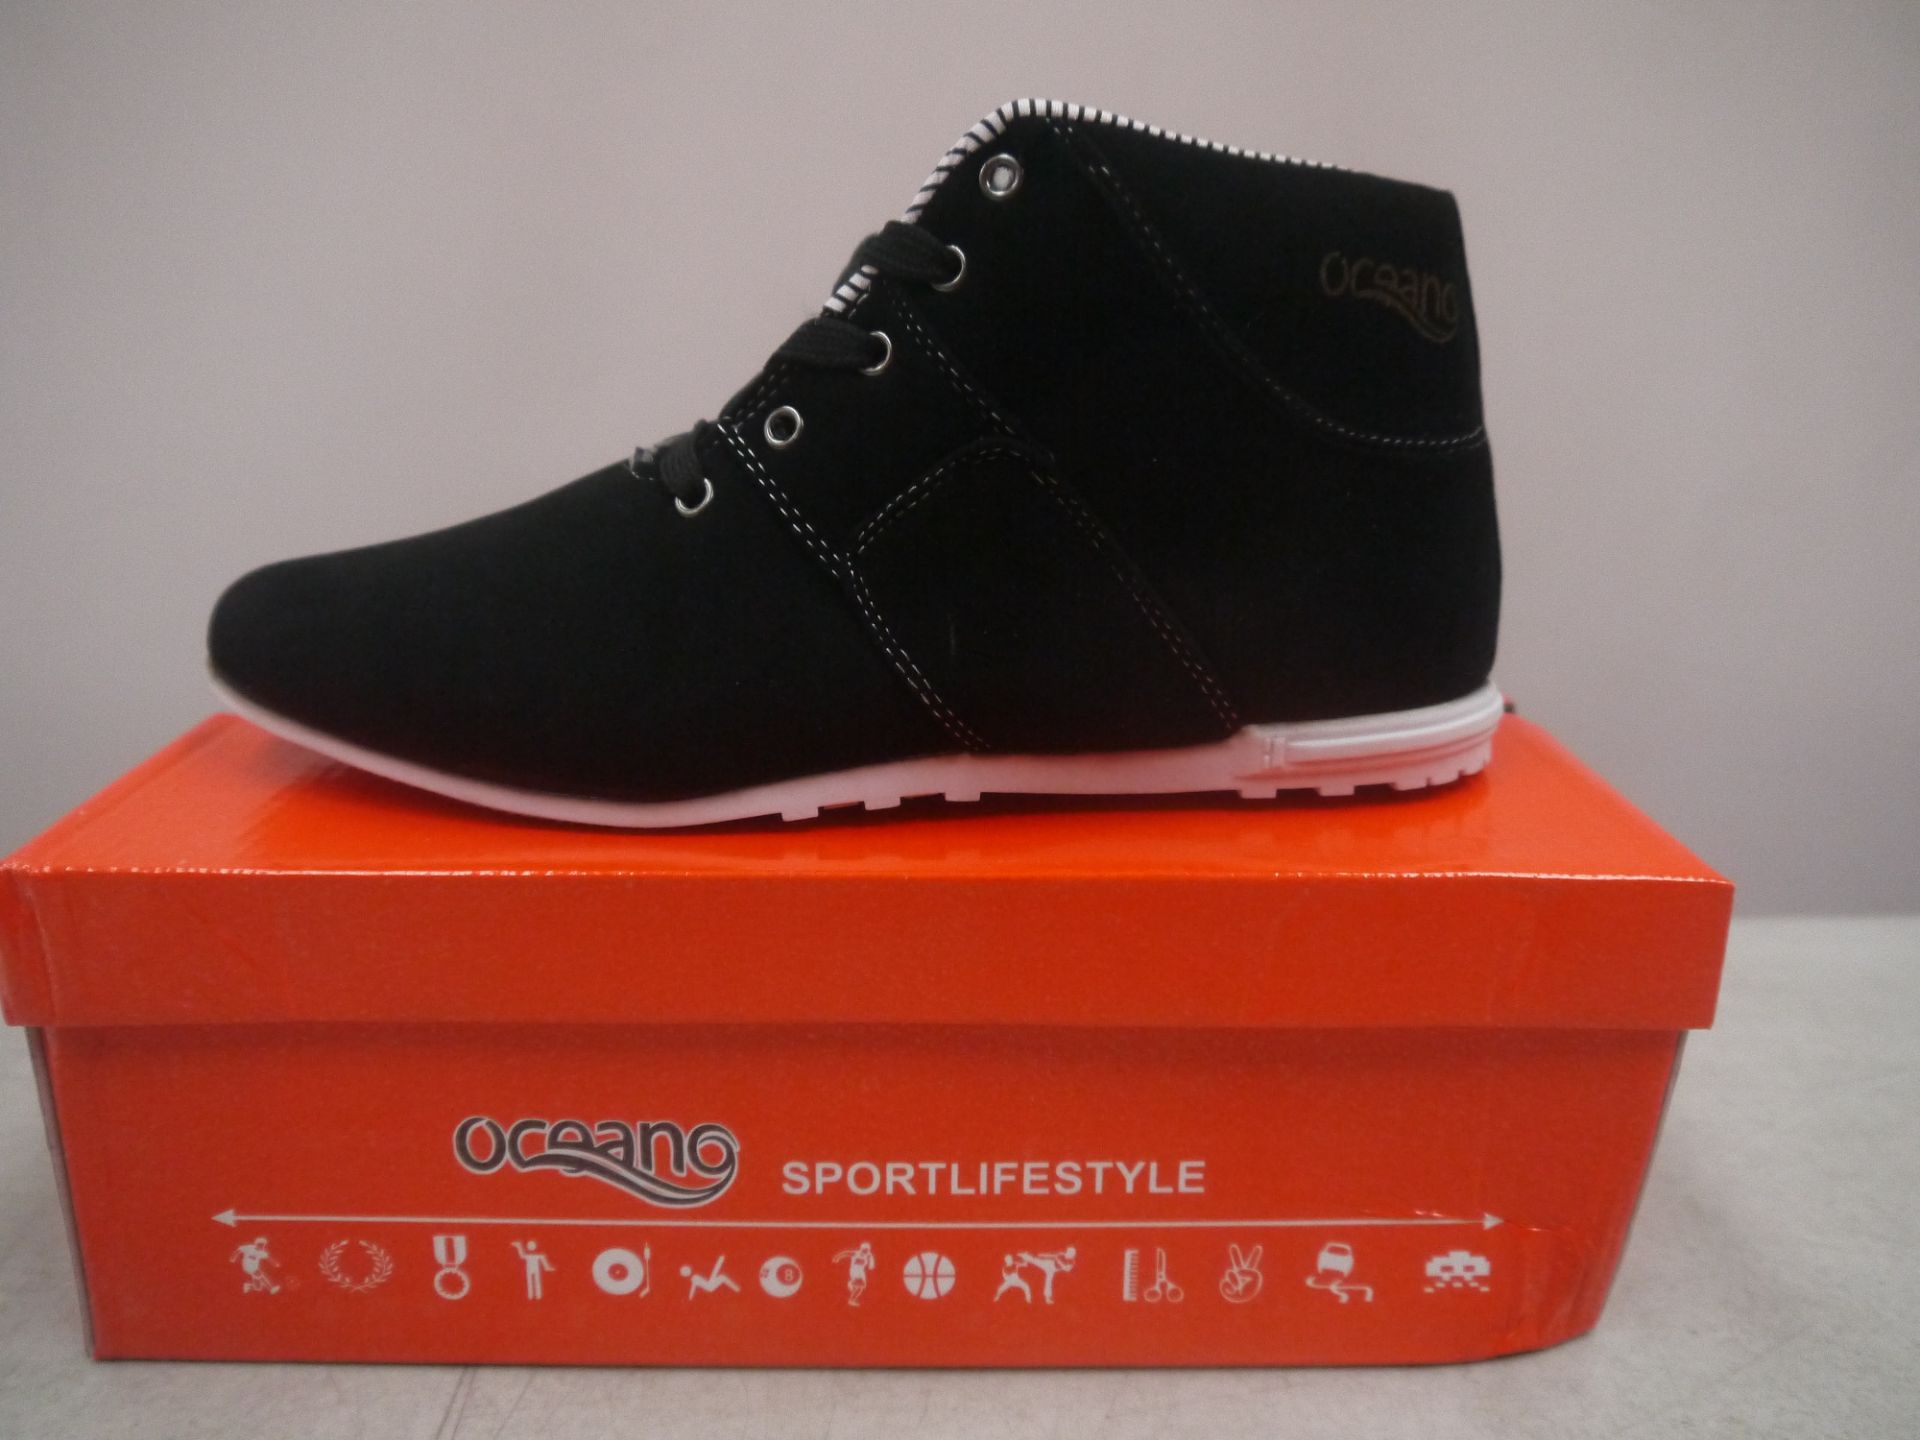 Mens Oceano Trainer Boot black suede style size 45,brand new and boxed